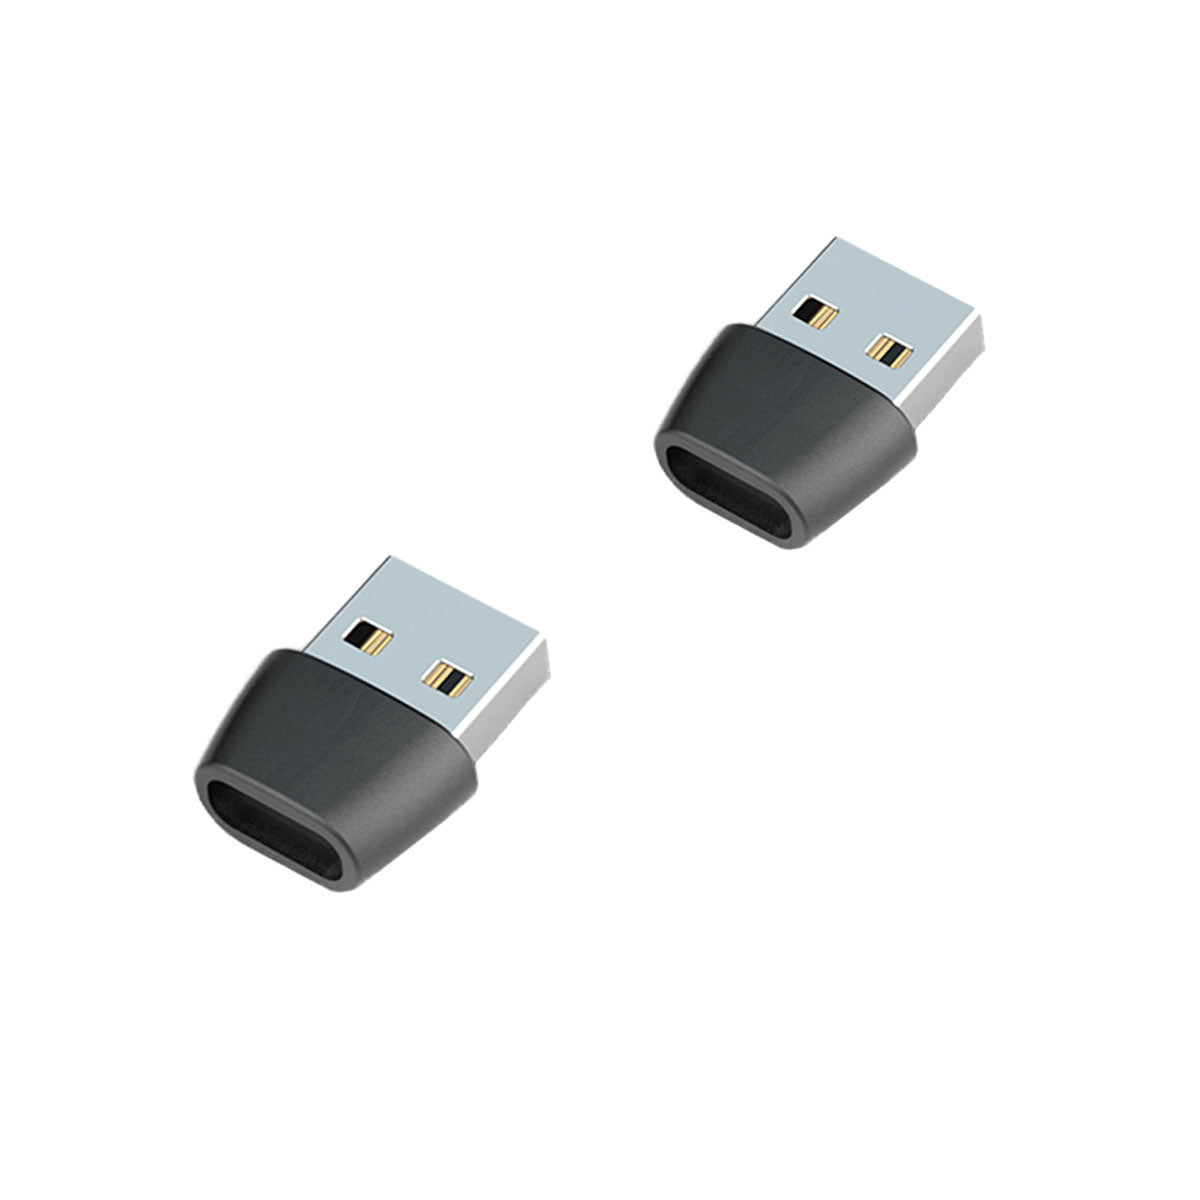 USB-C to USB-A Adapter - Pack of 2